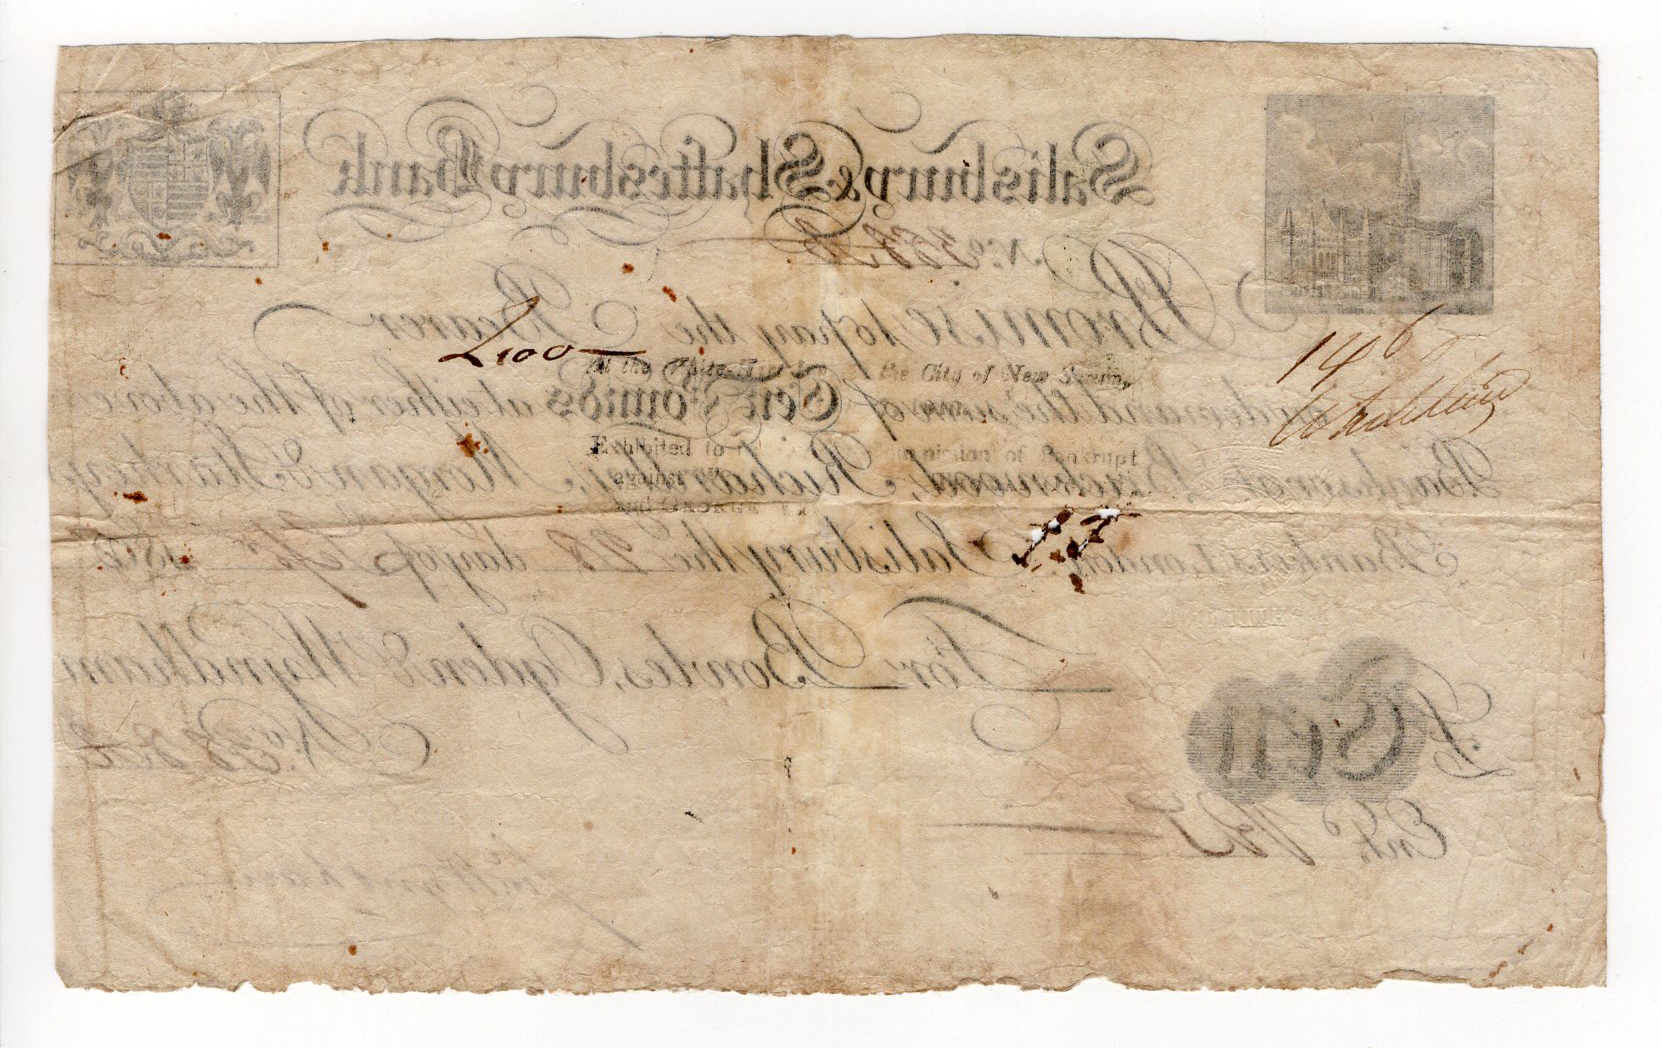 Salisbury & Shaftesbury Bank 10 Pounds dated 1808, serial No. 388A for Bowles, Ogden & Wyndham ( - Image 2 of 2